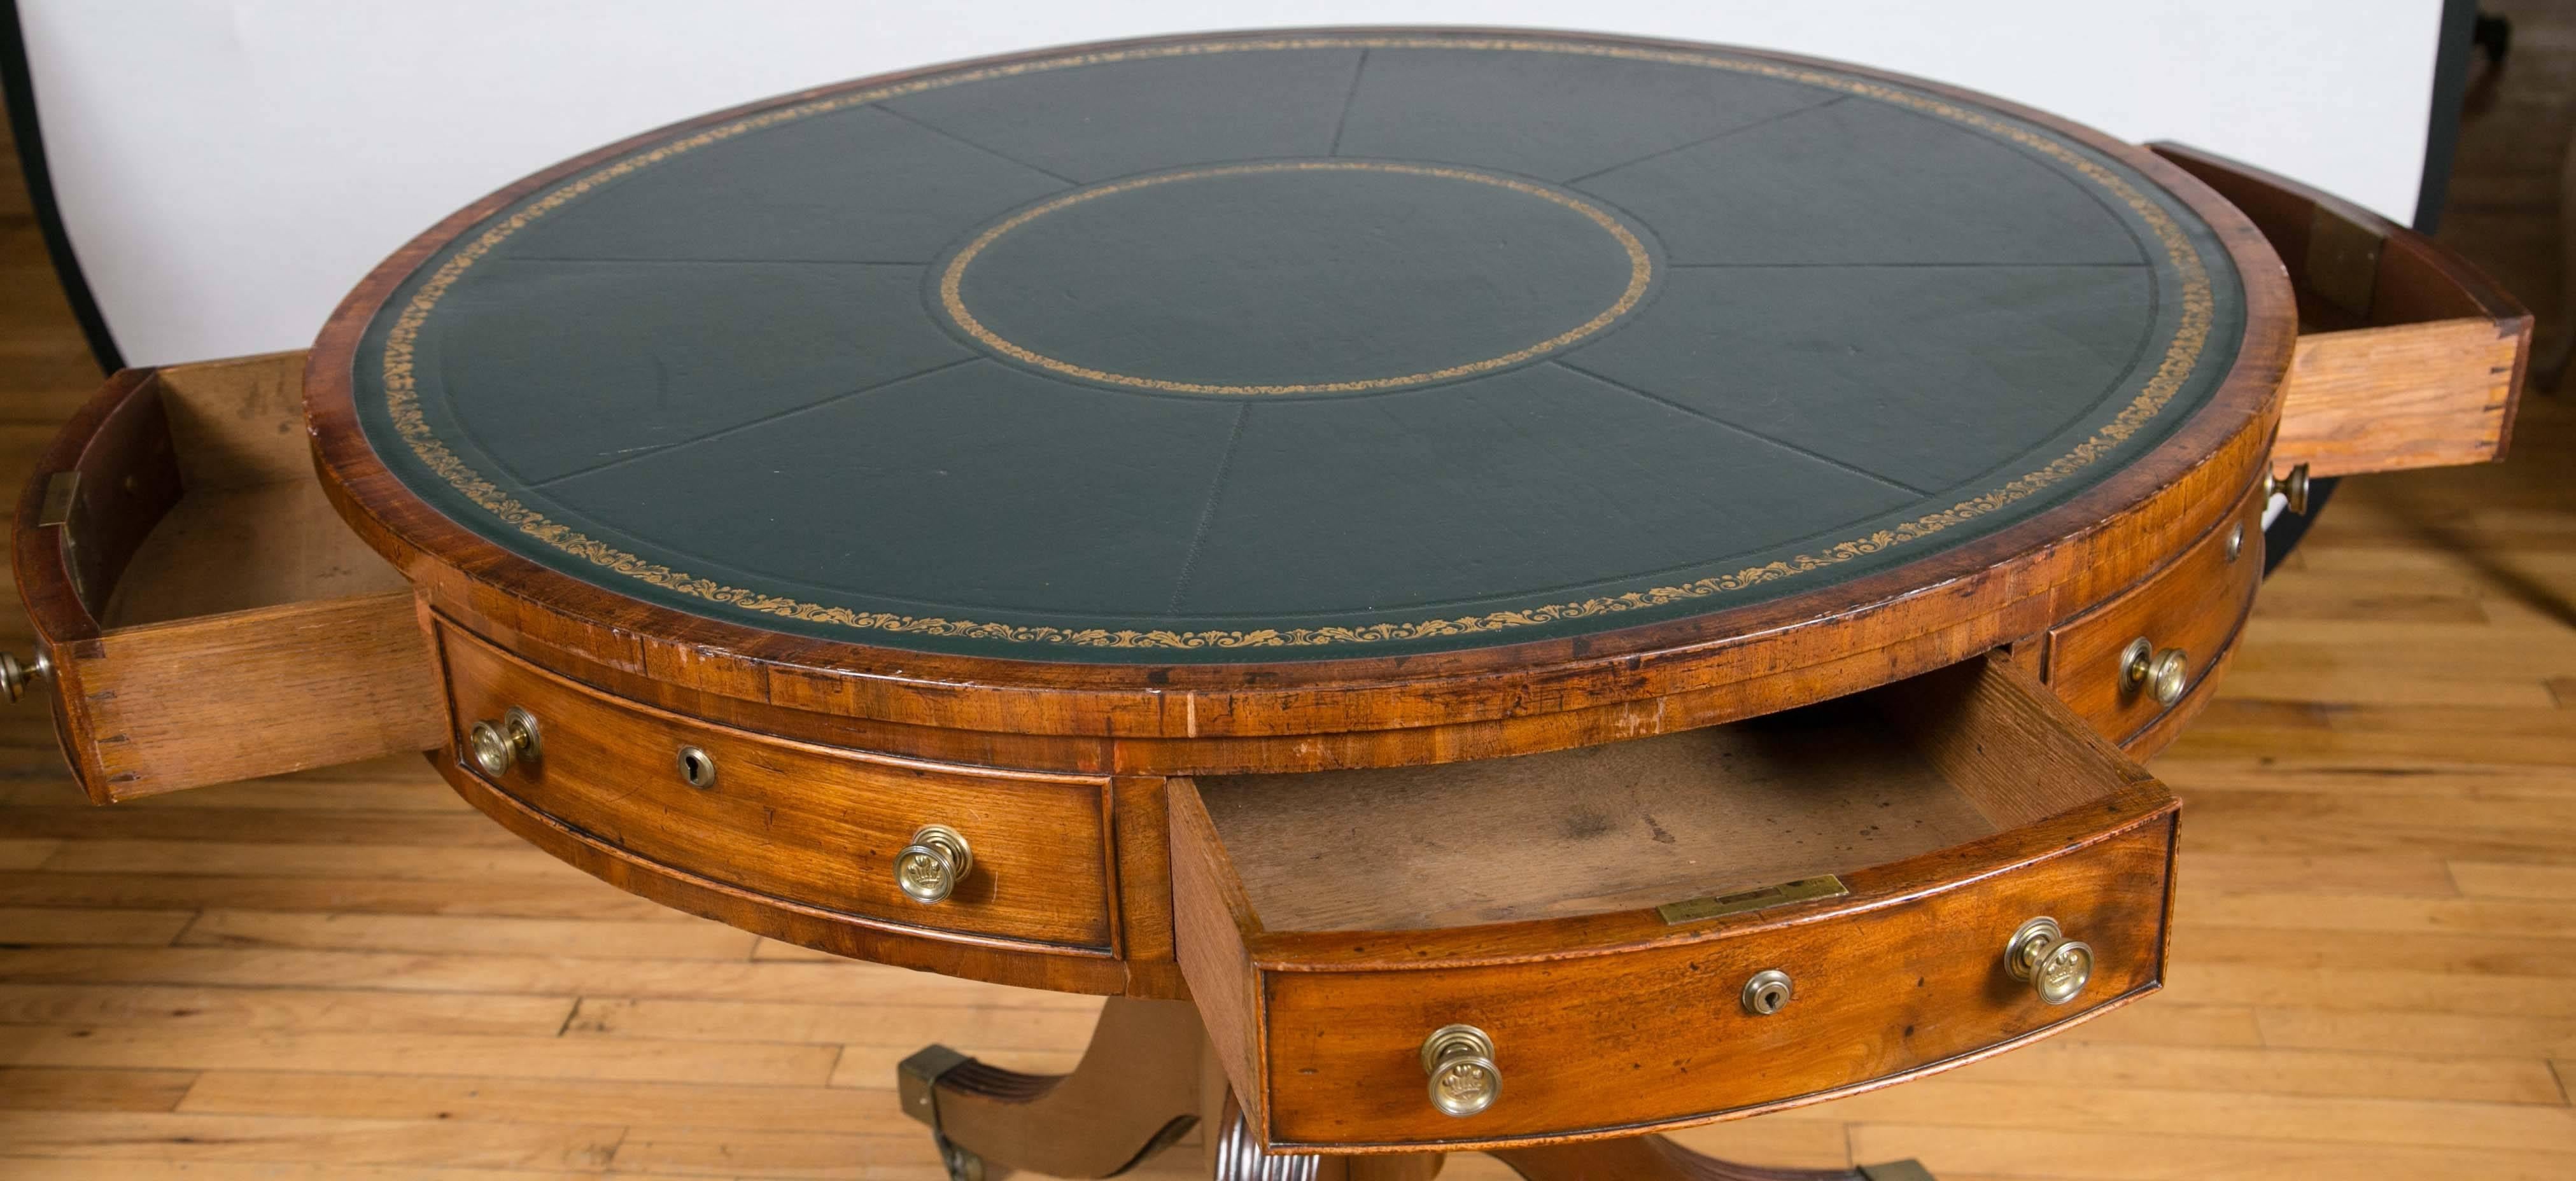 Leather English Regency Period Mahogany Drum Library Table